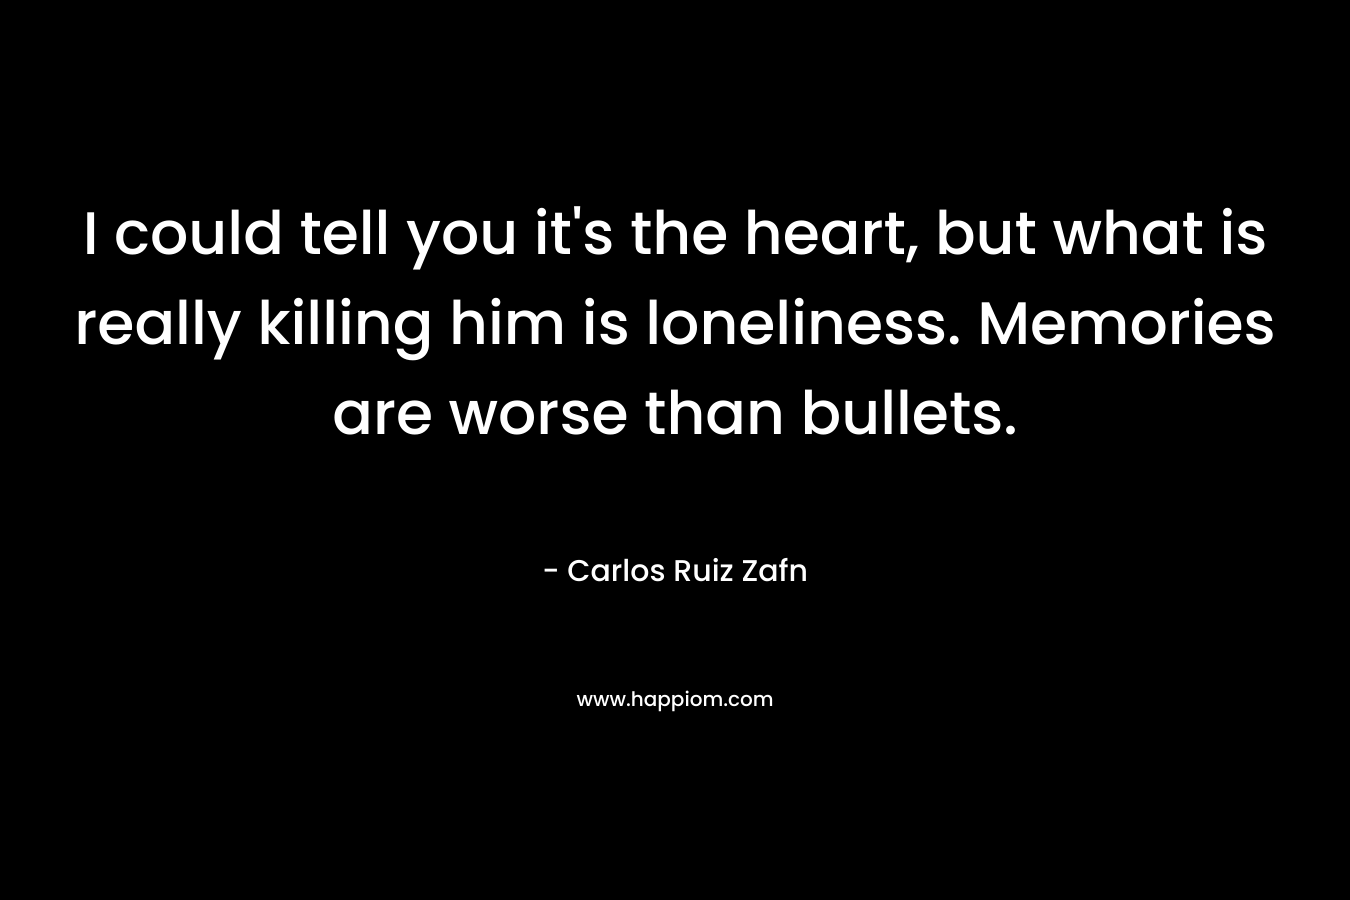 I could tell you it’s the heart, but what is really killing him is loneliness. Memories are worse than bullets. – Carlos Ruiz Zafn